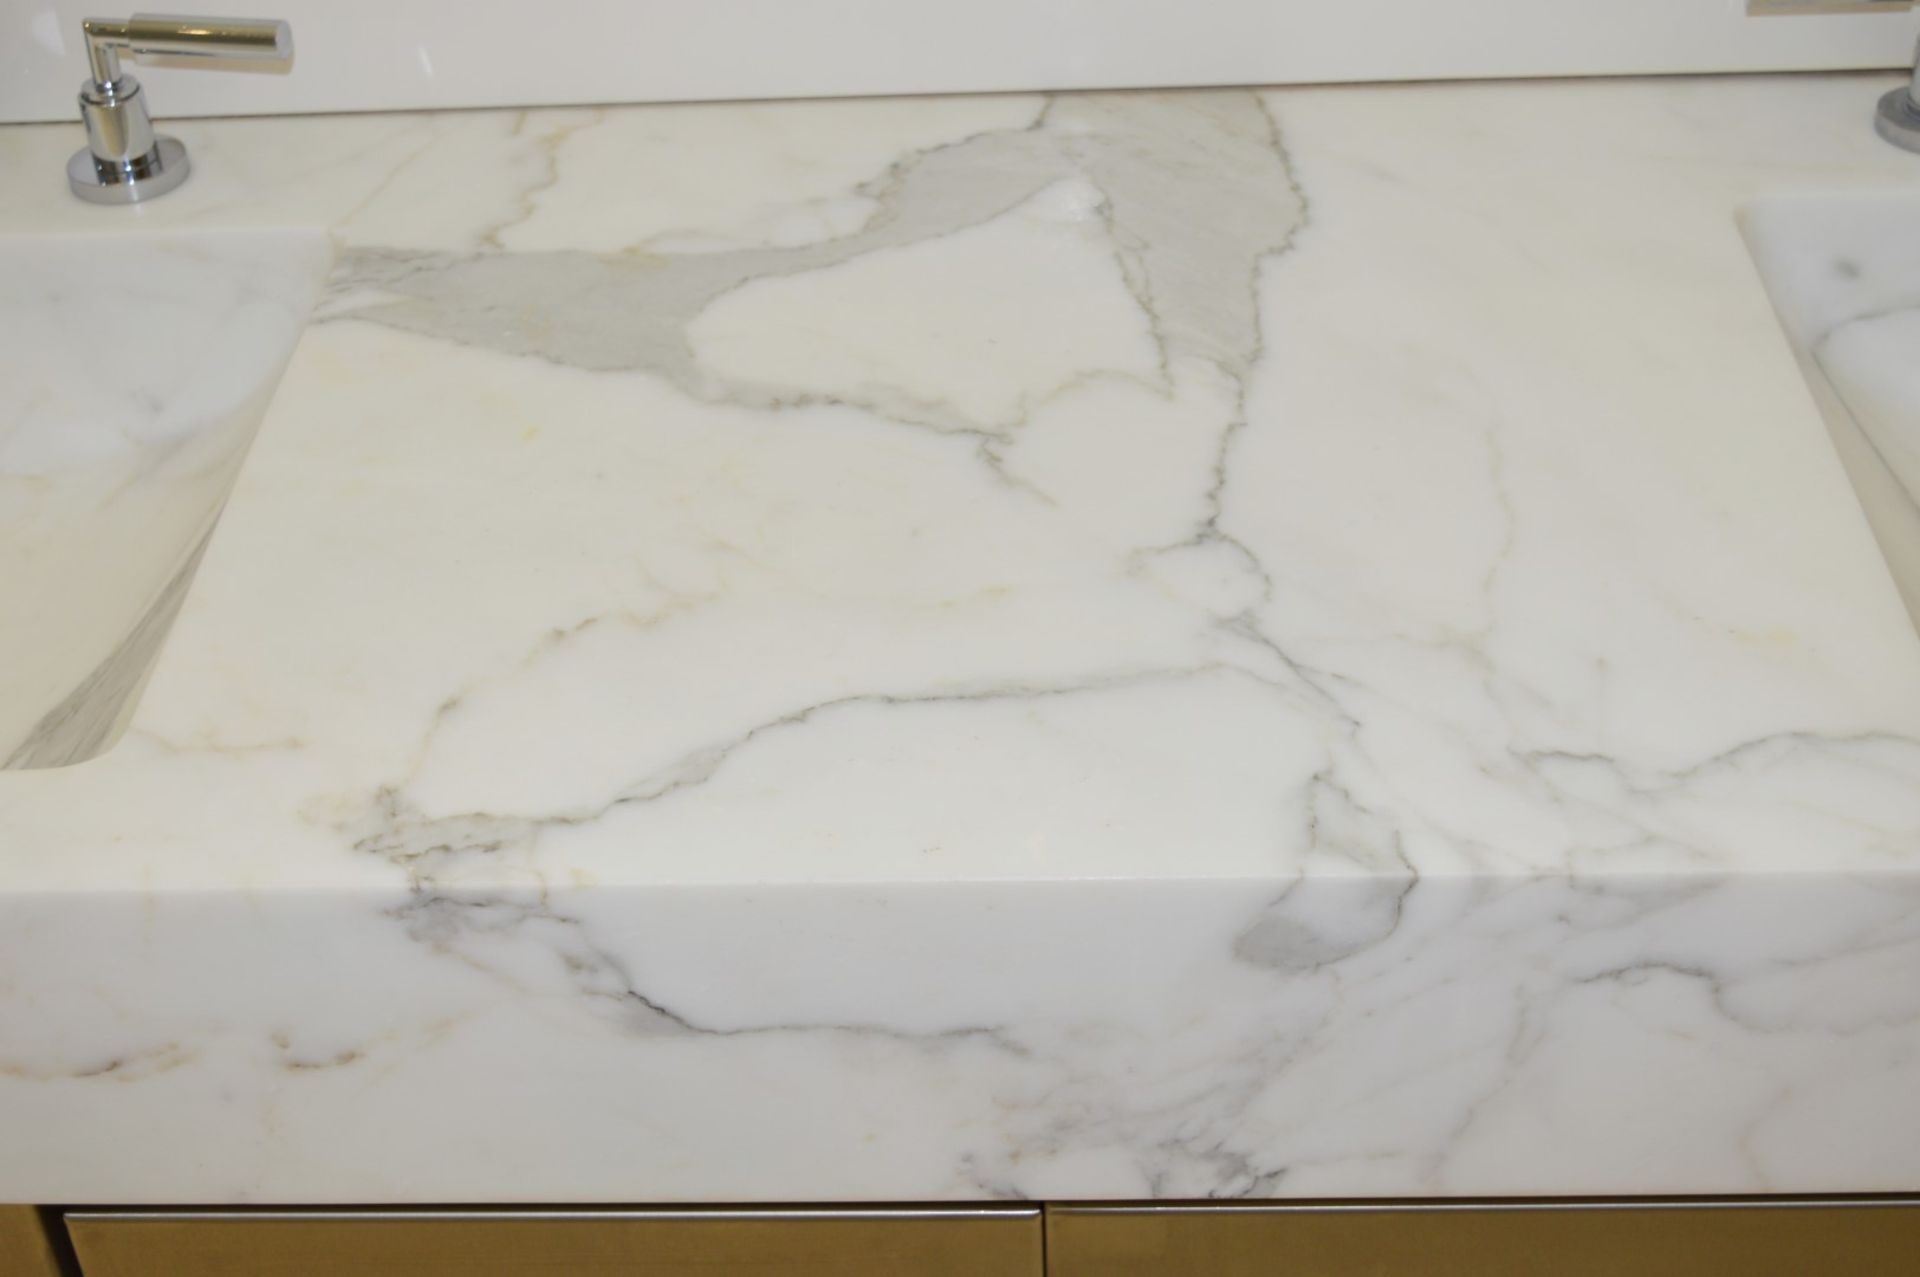 1 x Bespoke His & Hers Marble Bathroom Vanity Unit - Exquisite 7ft Twin Marble Sink Basin With Two - Image 17 of 25